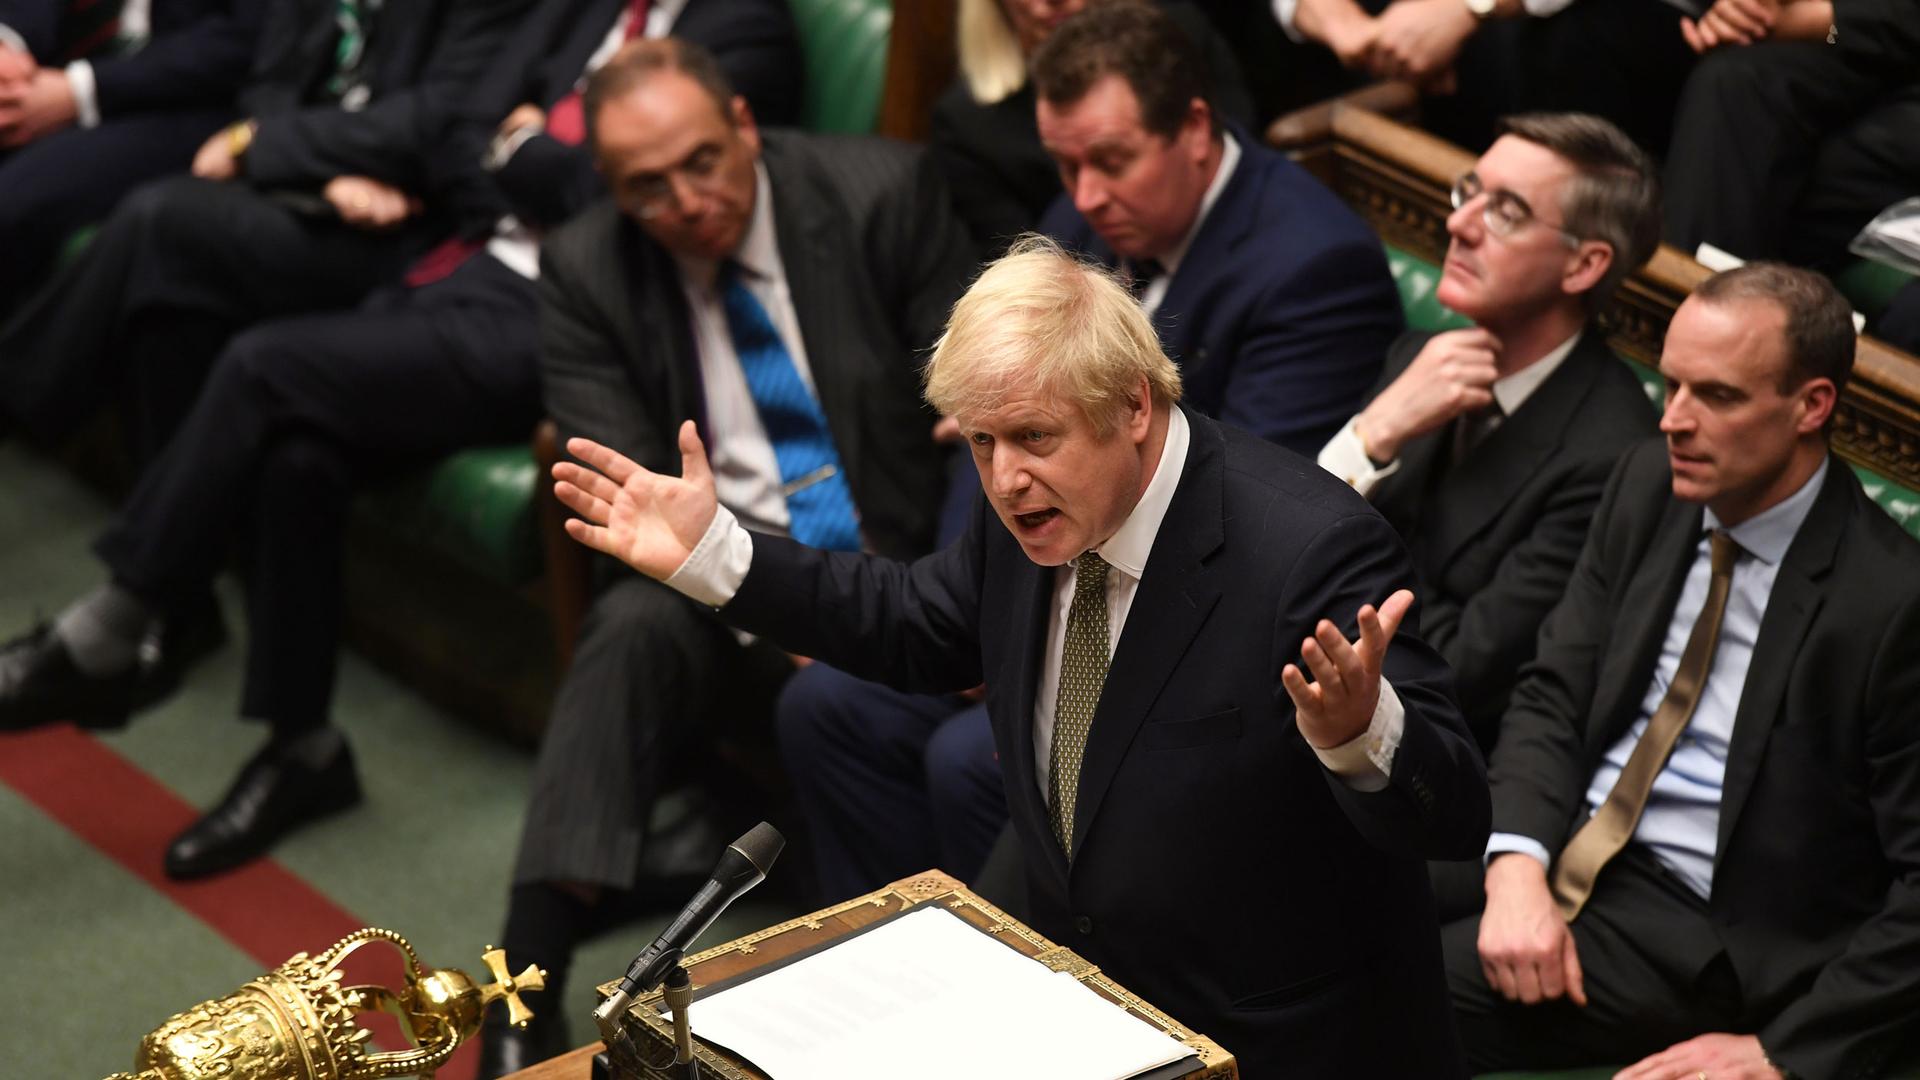 Britain's Prime Minister Boris Johnson is shown standing at a lecturn with a microphone and several parliamentary members sitting behind him.